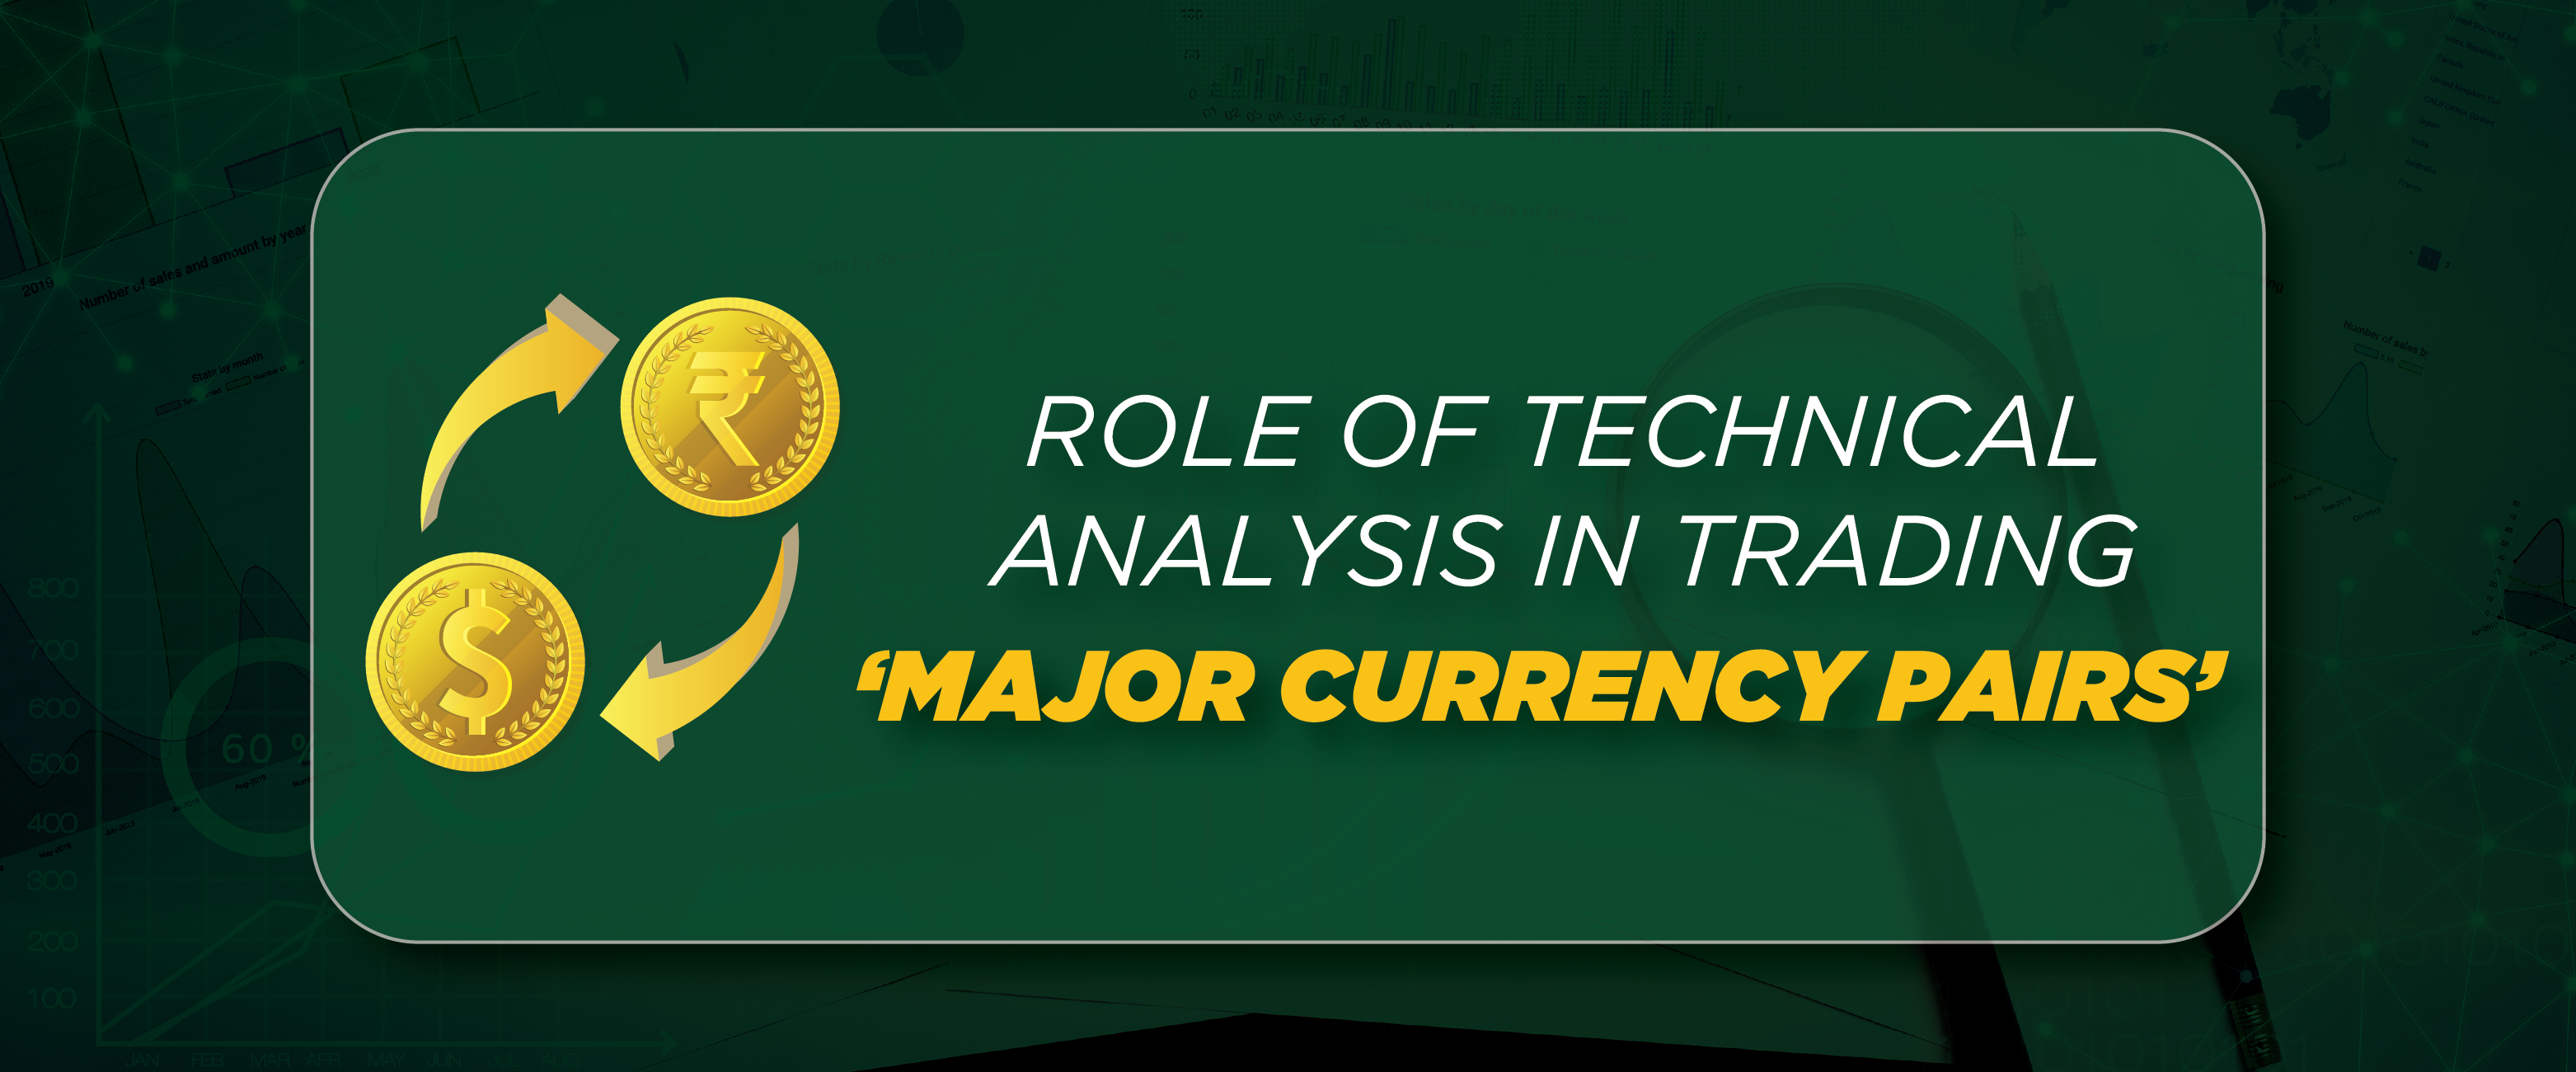 Role of Technical Analysis in Trading ‘Major Currency Pairs’